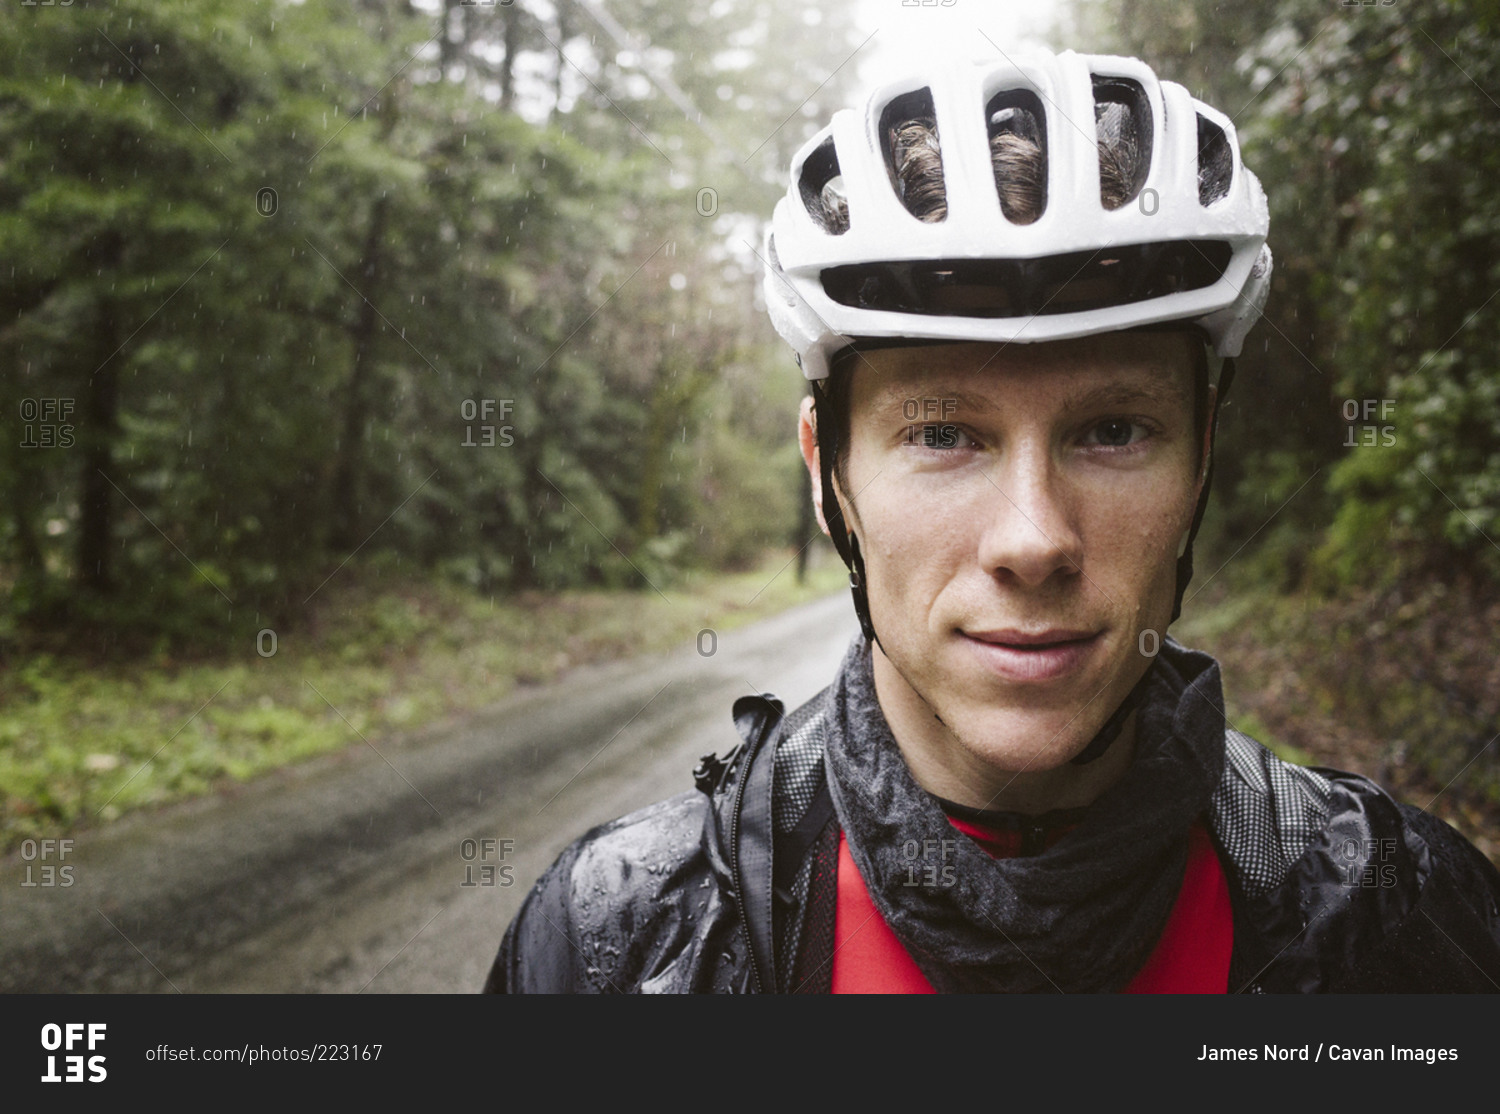 A cyclist standing in the rain